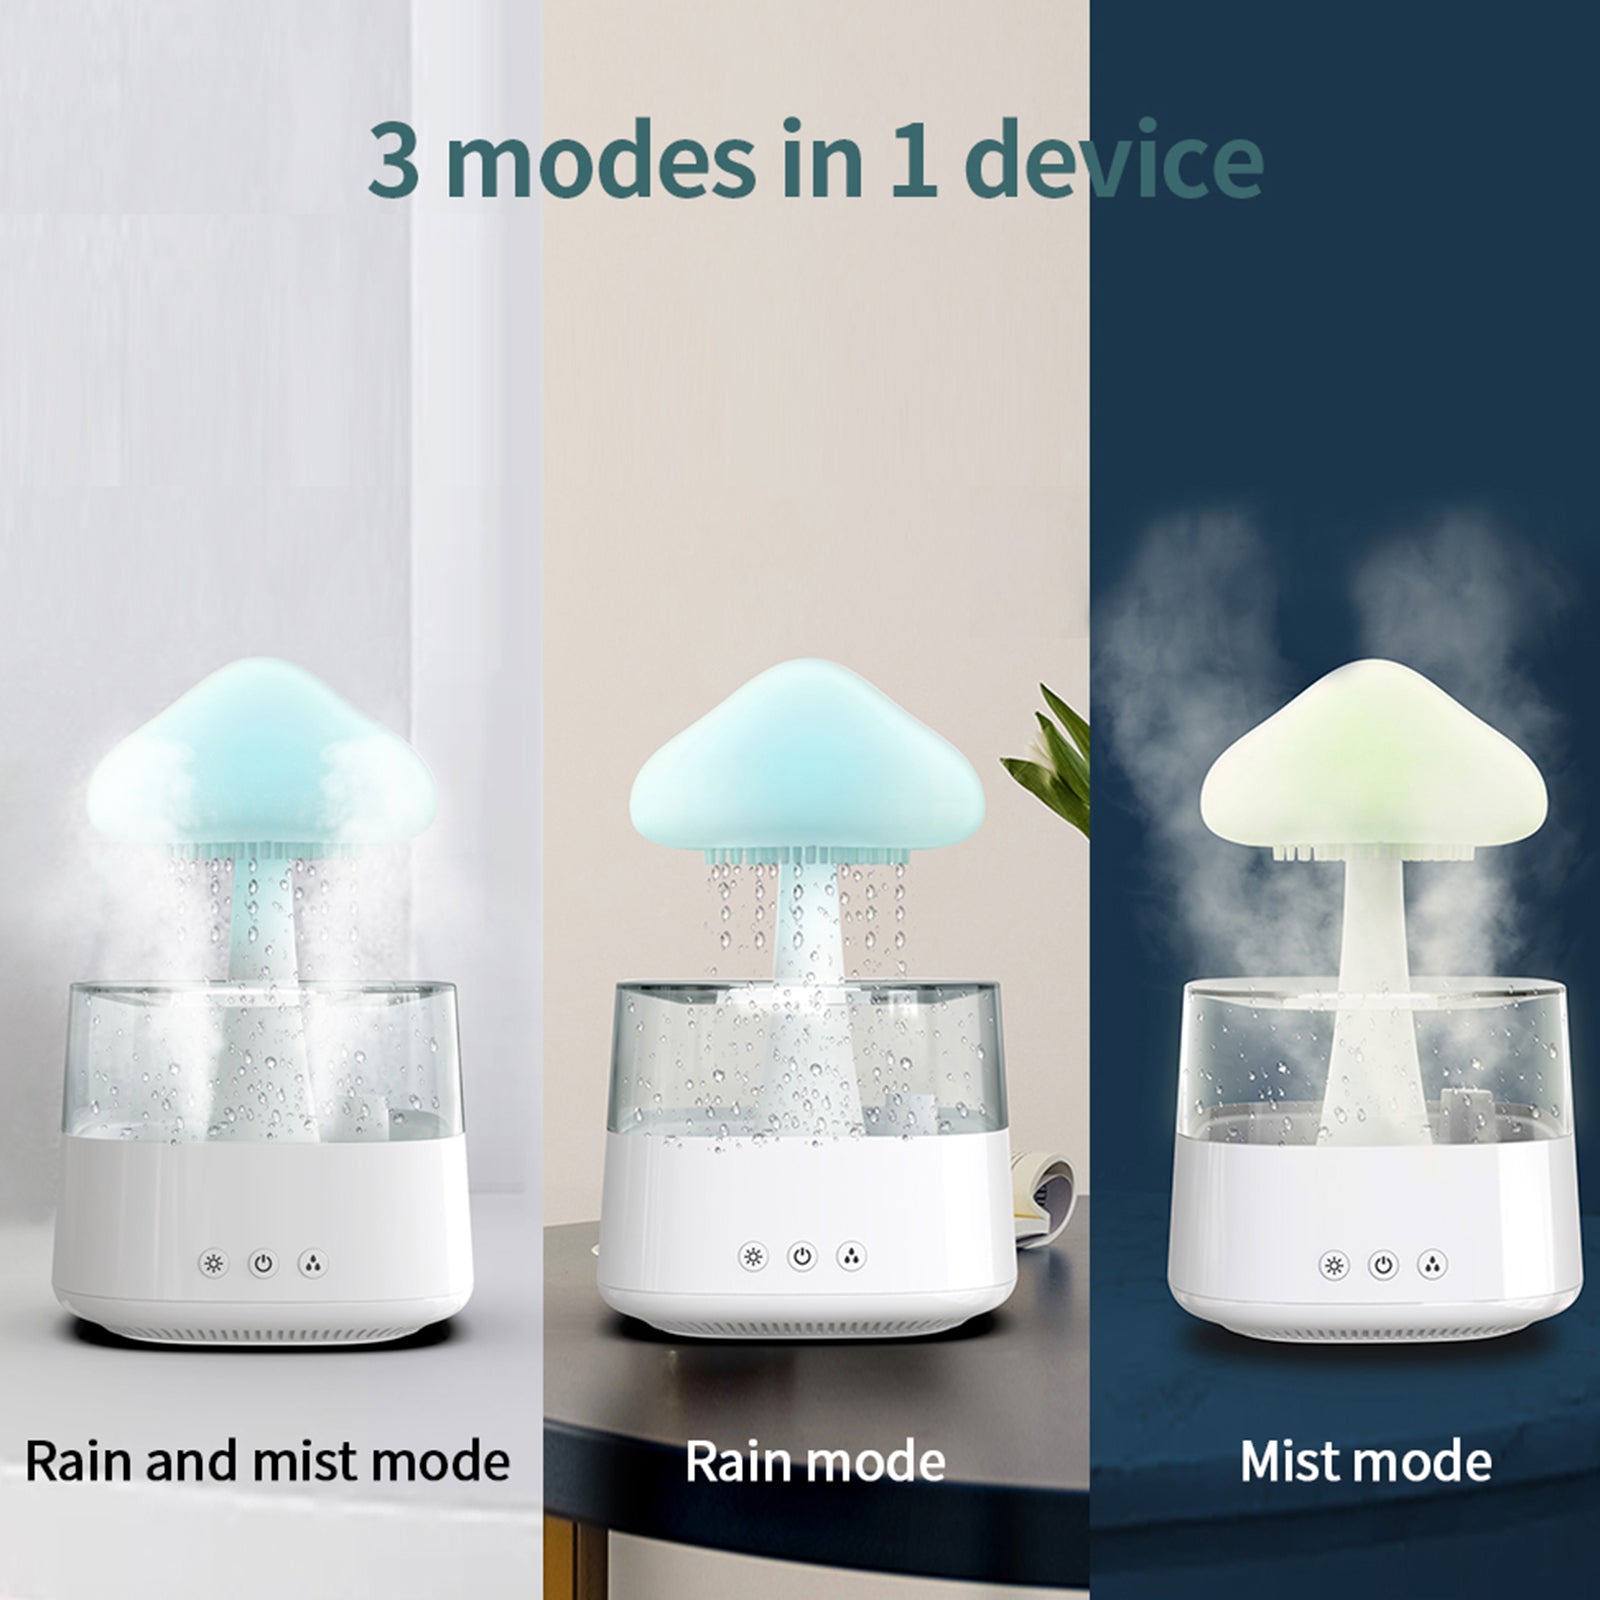 Rain Cloud Humidifier, Rain Cloud Night Light, Aromatherapy Essential Oil Diffuser with 7 Color Changing, Raindrop Sound for Home Office Room